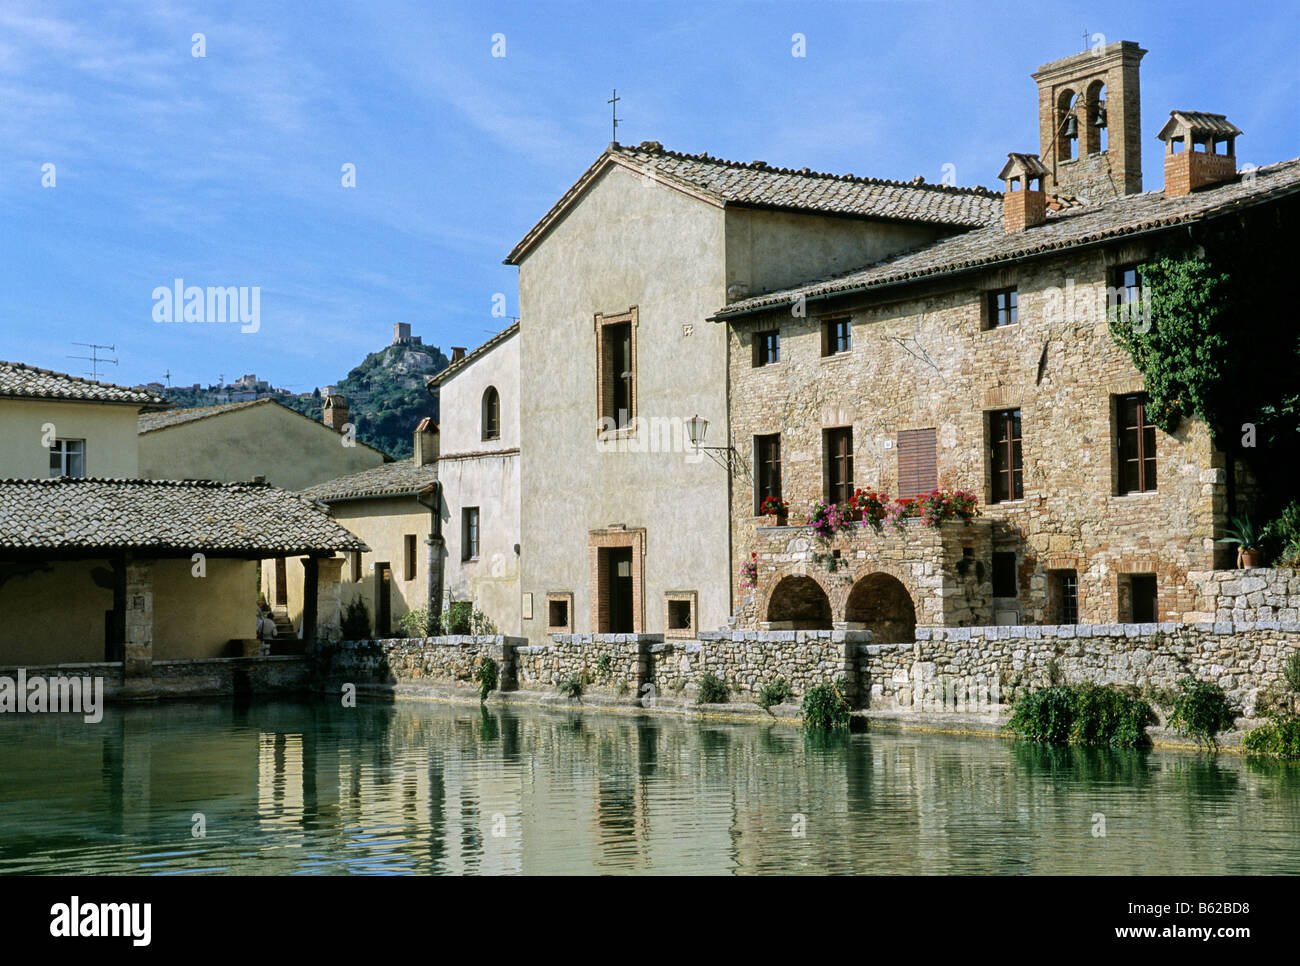 Thermal pool in Bagno Vignoni, at back the Rocca d' Orcia, Siena province, Tuscany, Italy, Europe Stock Photo